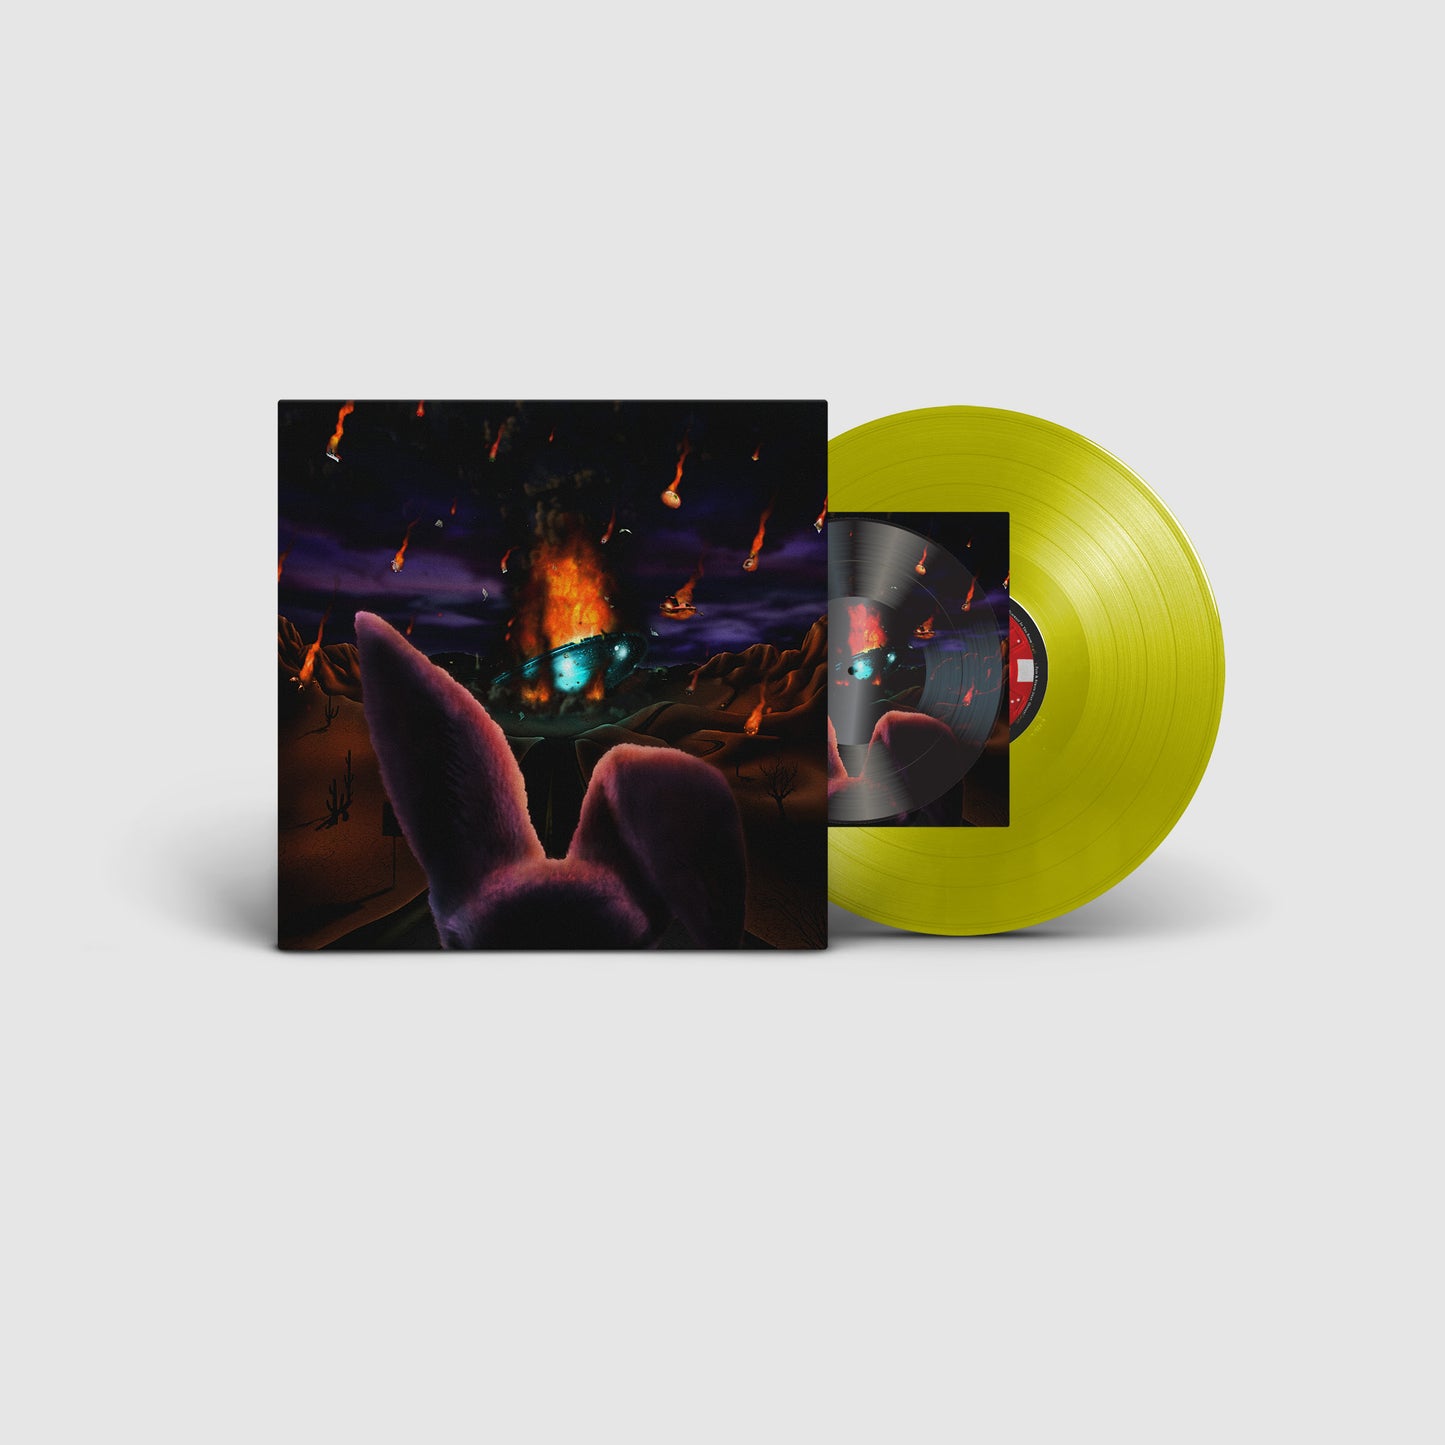 $oul $old $eparately (Indie Exclusive, Neon Yellow, includes flexi disc with one extra track)